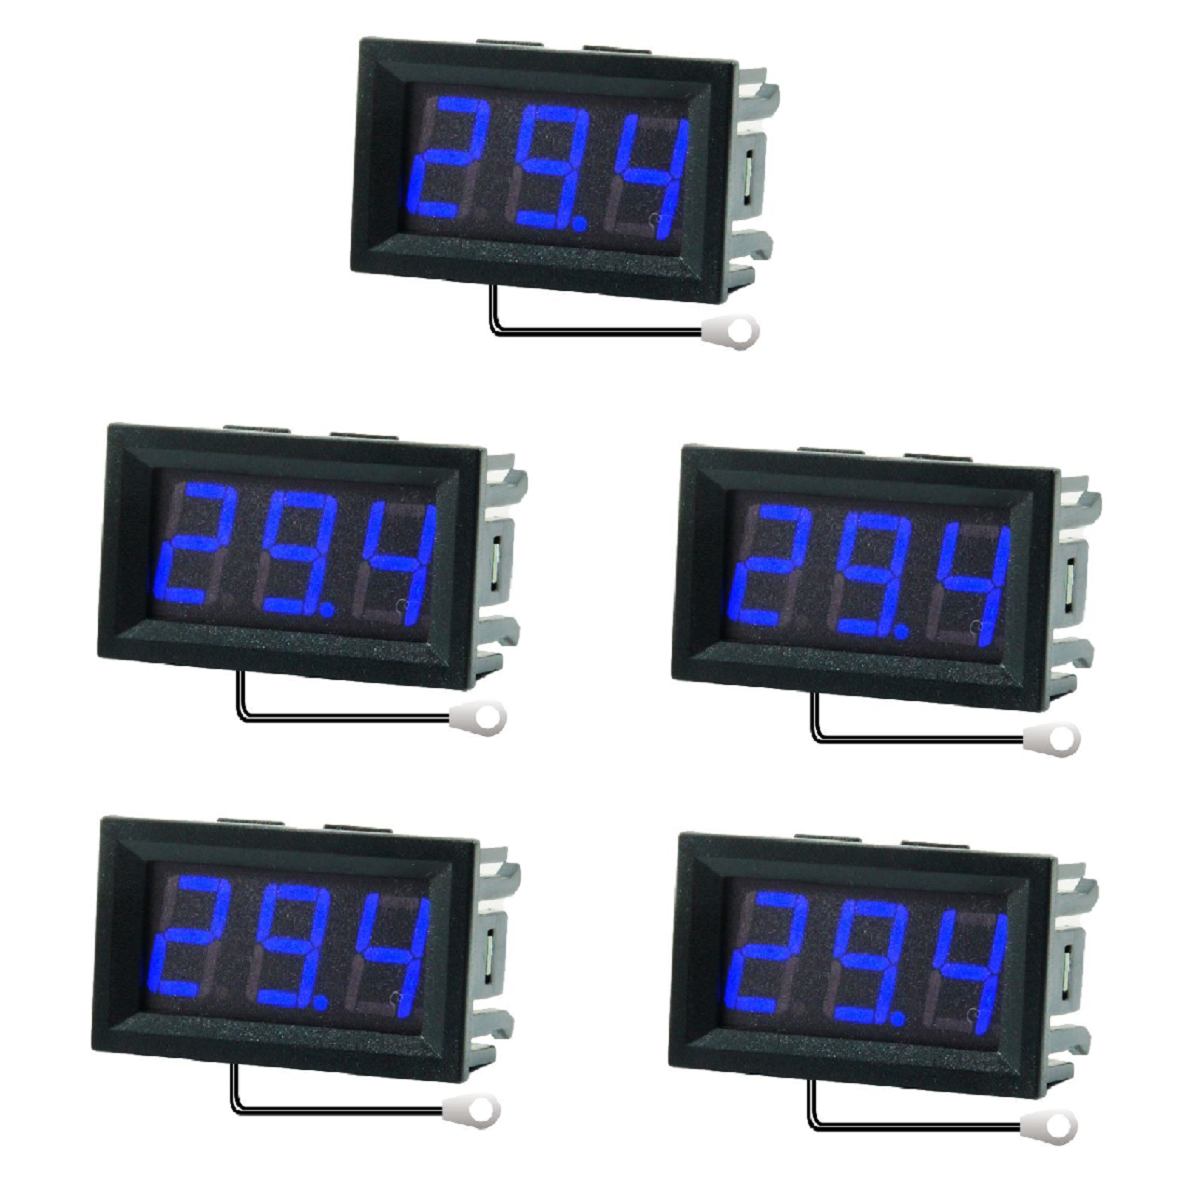 5Pcs 0.56 Inch Mini Digital LCD Indoor Convenient Temperature Sensor Meter Monitor Thermometer with 1M Cable -50-120℃ DC